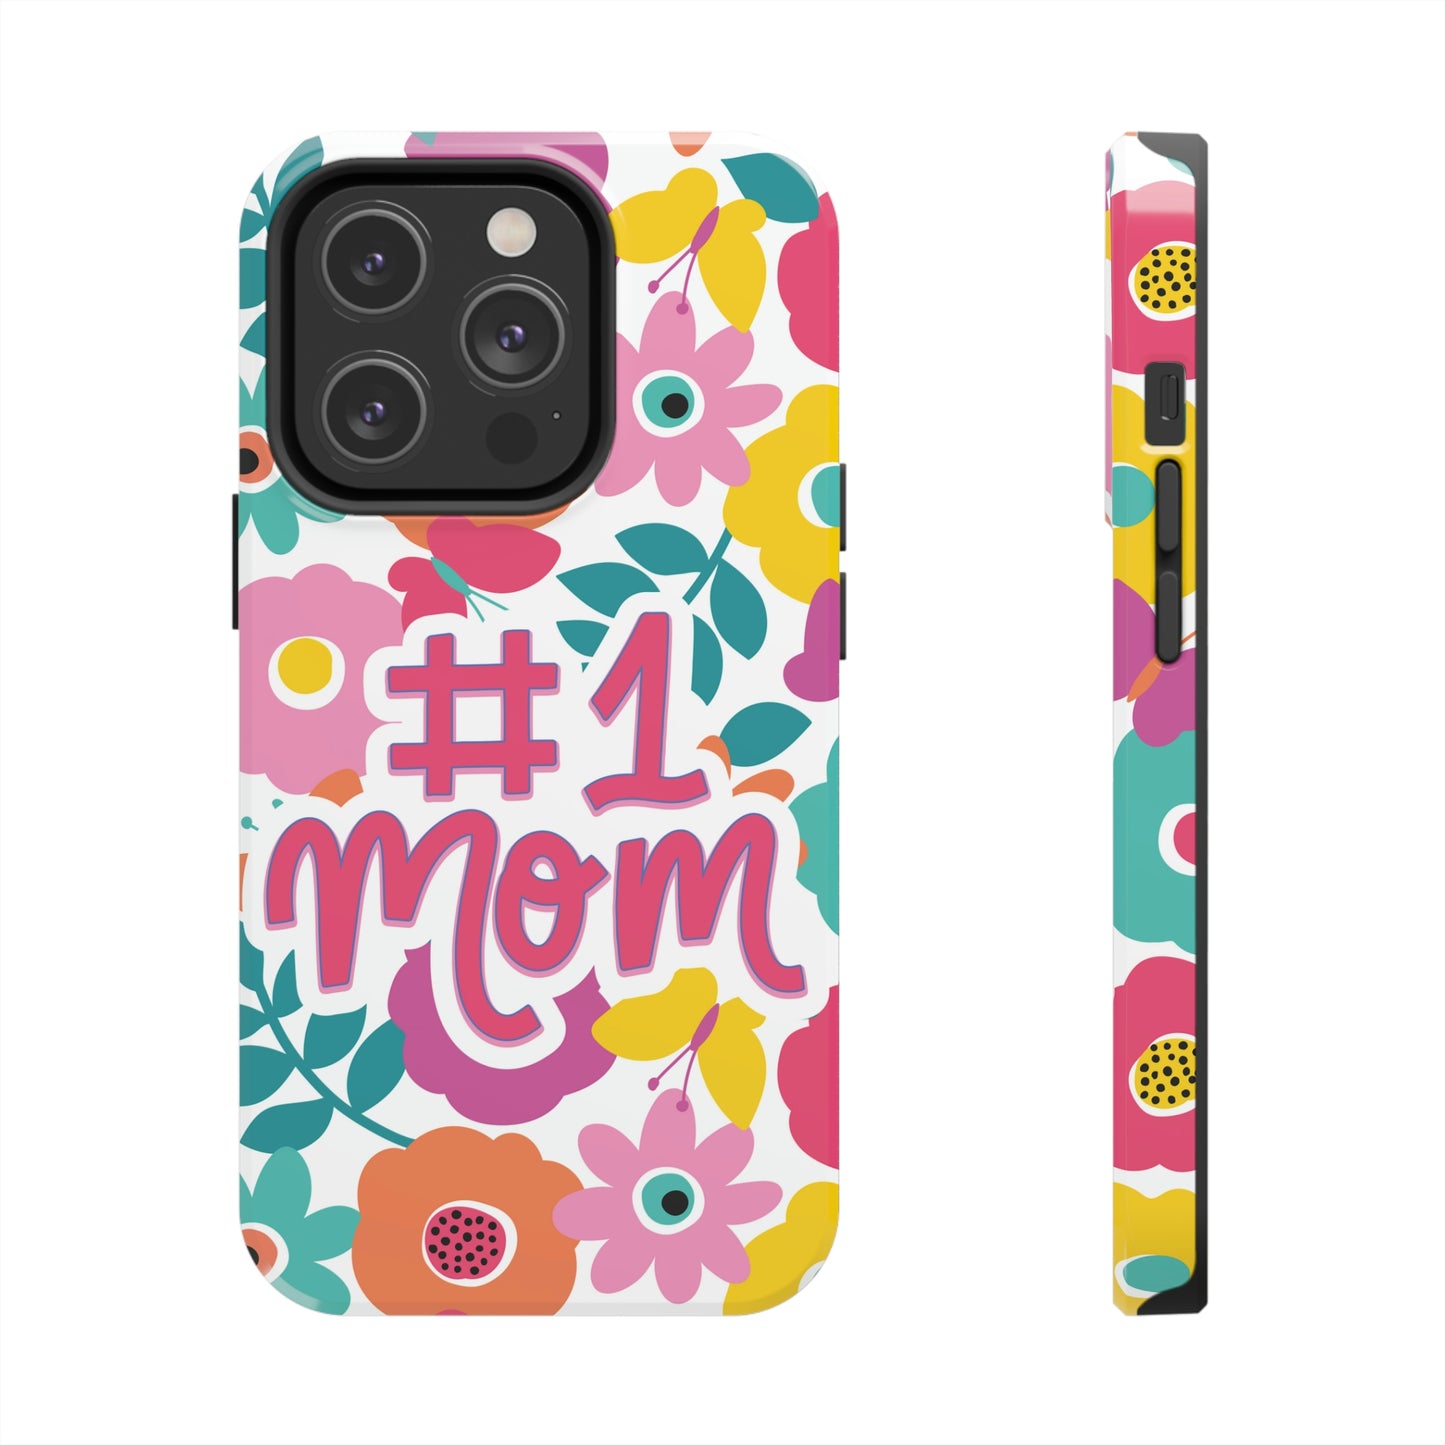 #1 Mom Tough iPhone Cases by Case-Mate, Mothers Day Gift